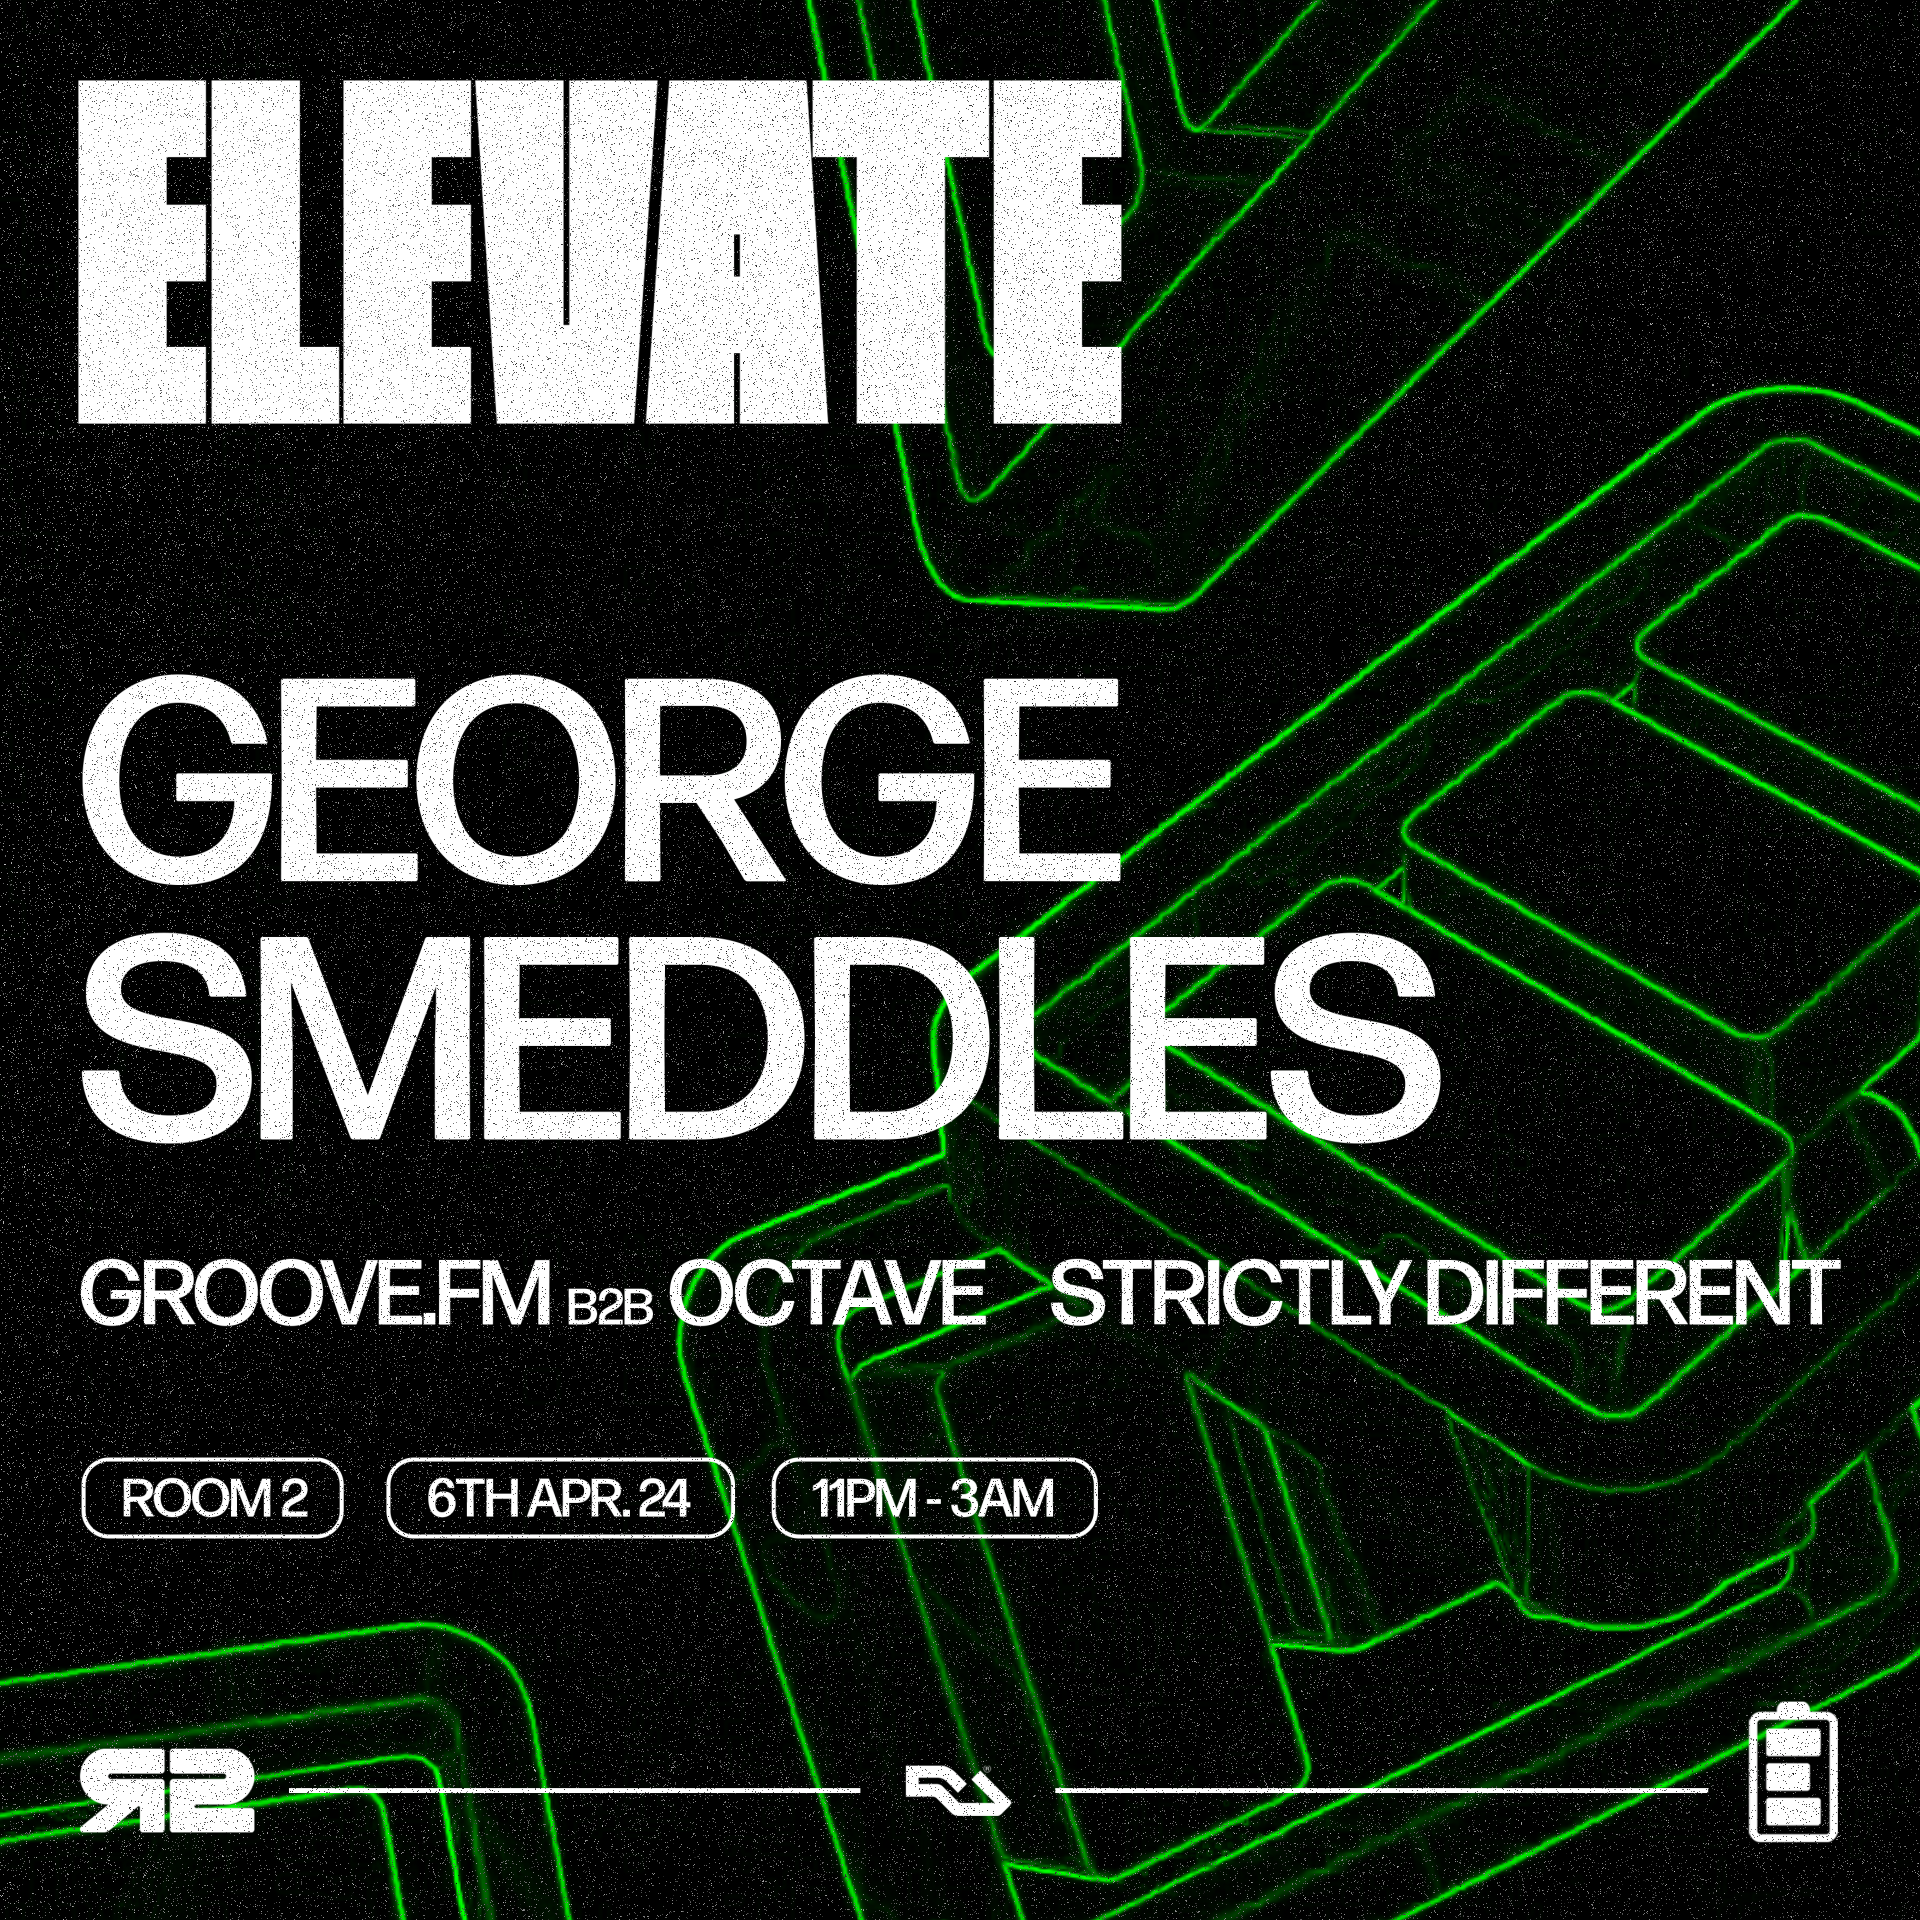 [CANCELLED] Elevate presents: George Smeddles - フライヤー表